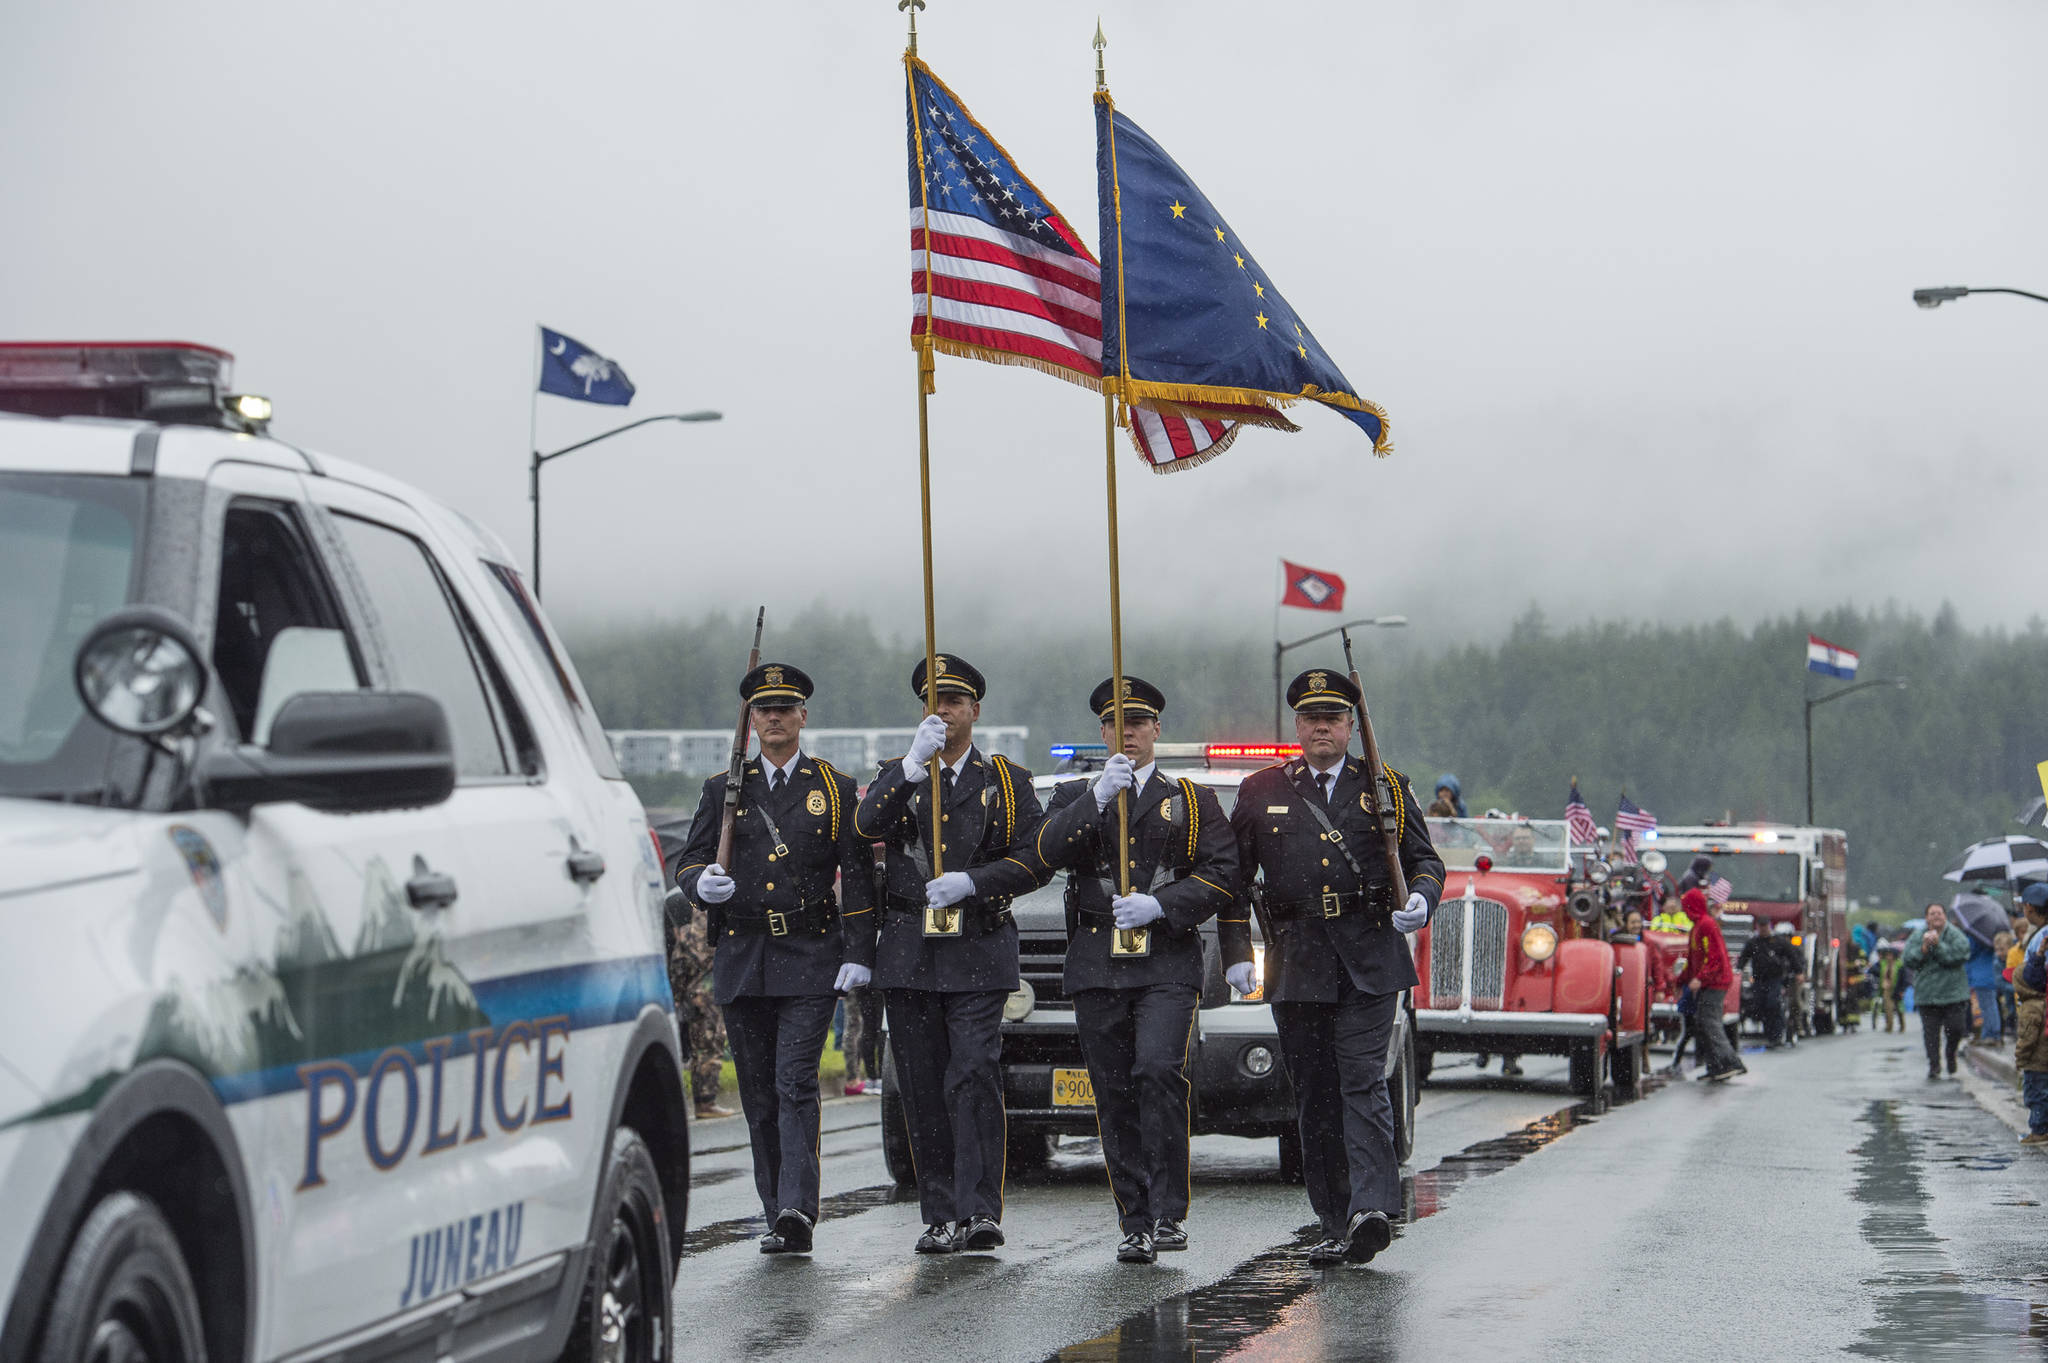 Juneau Police Department representatives march in the Juneau 4th of July parade on Tuesday, July 4, 2017. (Michael Penn | Juneau Empire File)